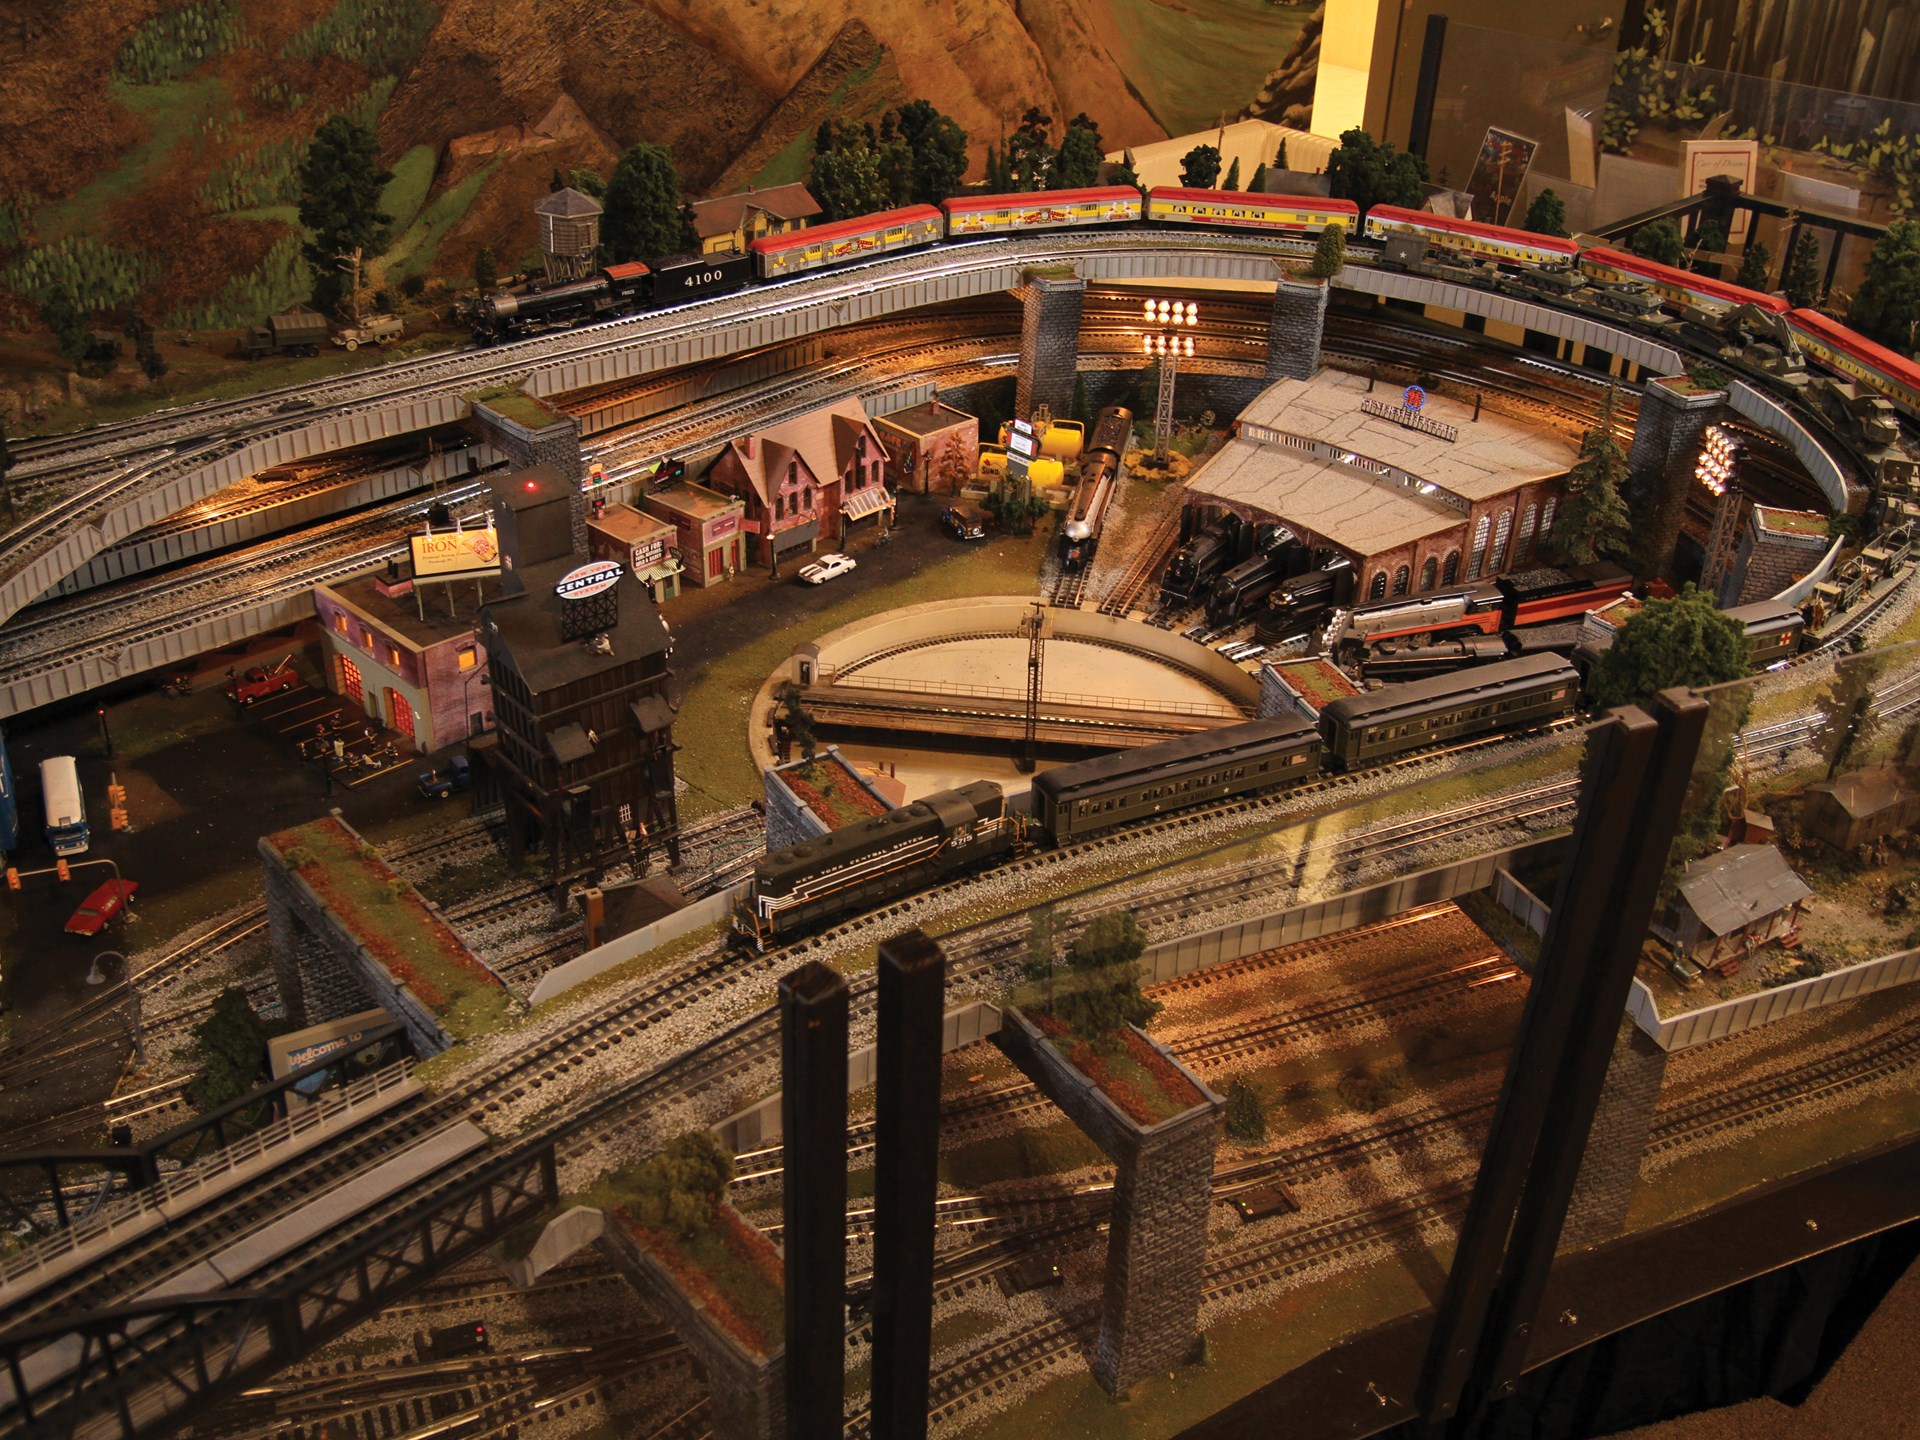 RM Sotheby's - Large-Scale Lionel Train Layout | The John Staluppi